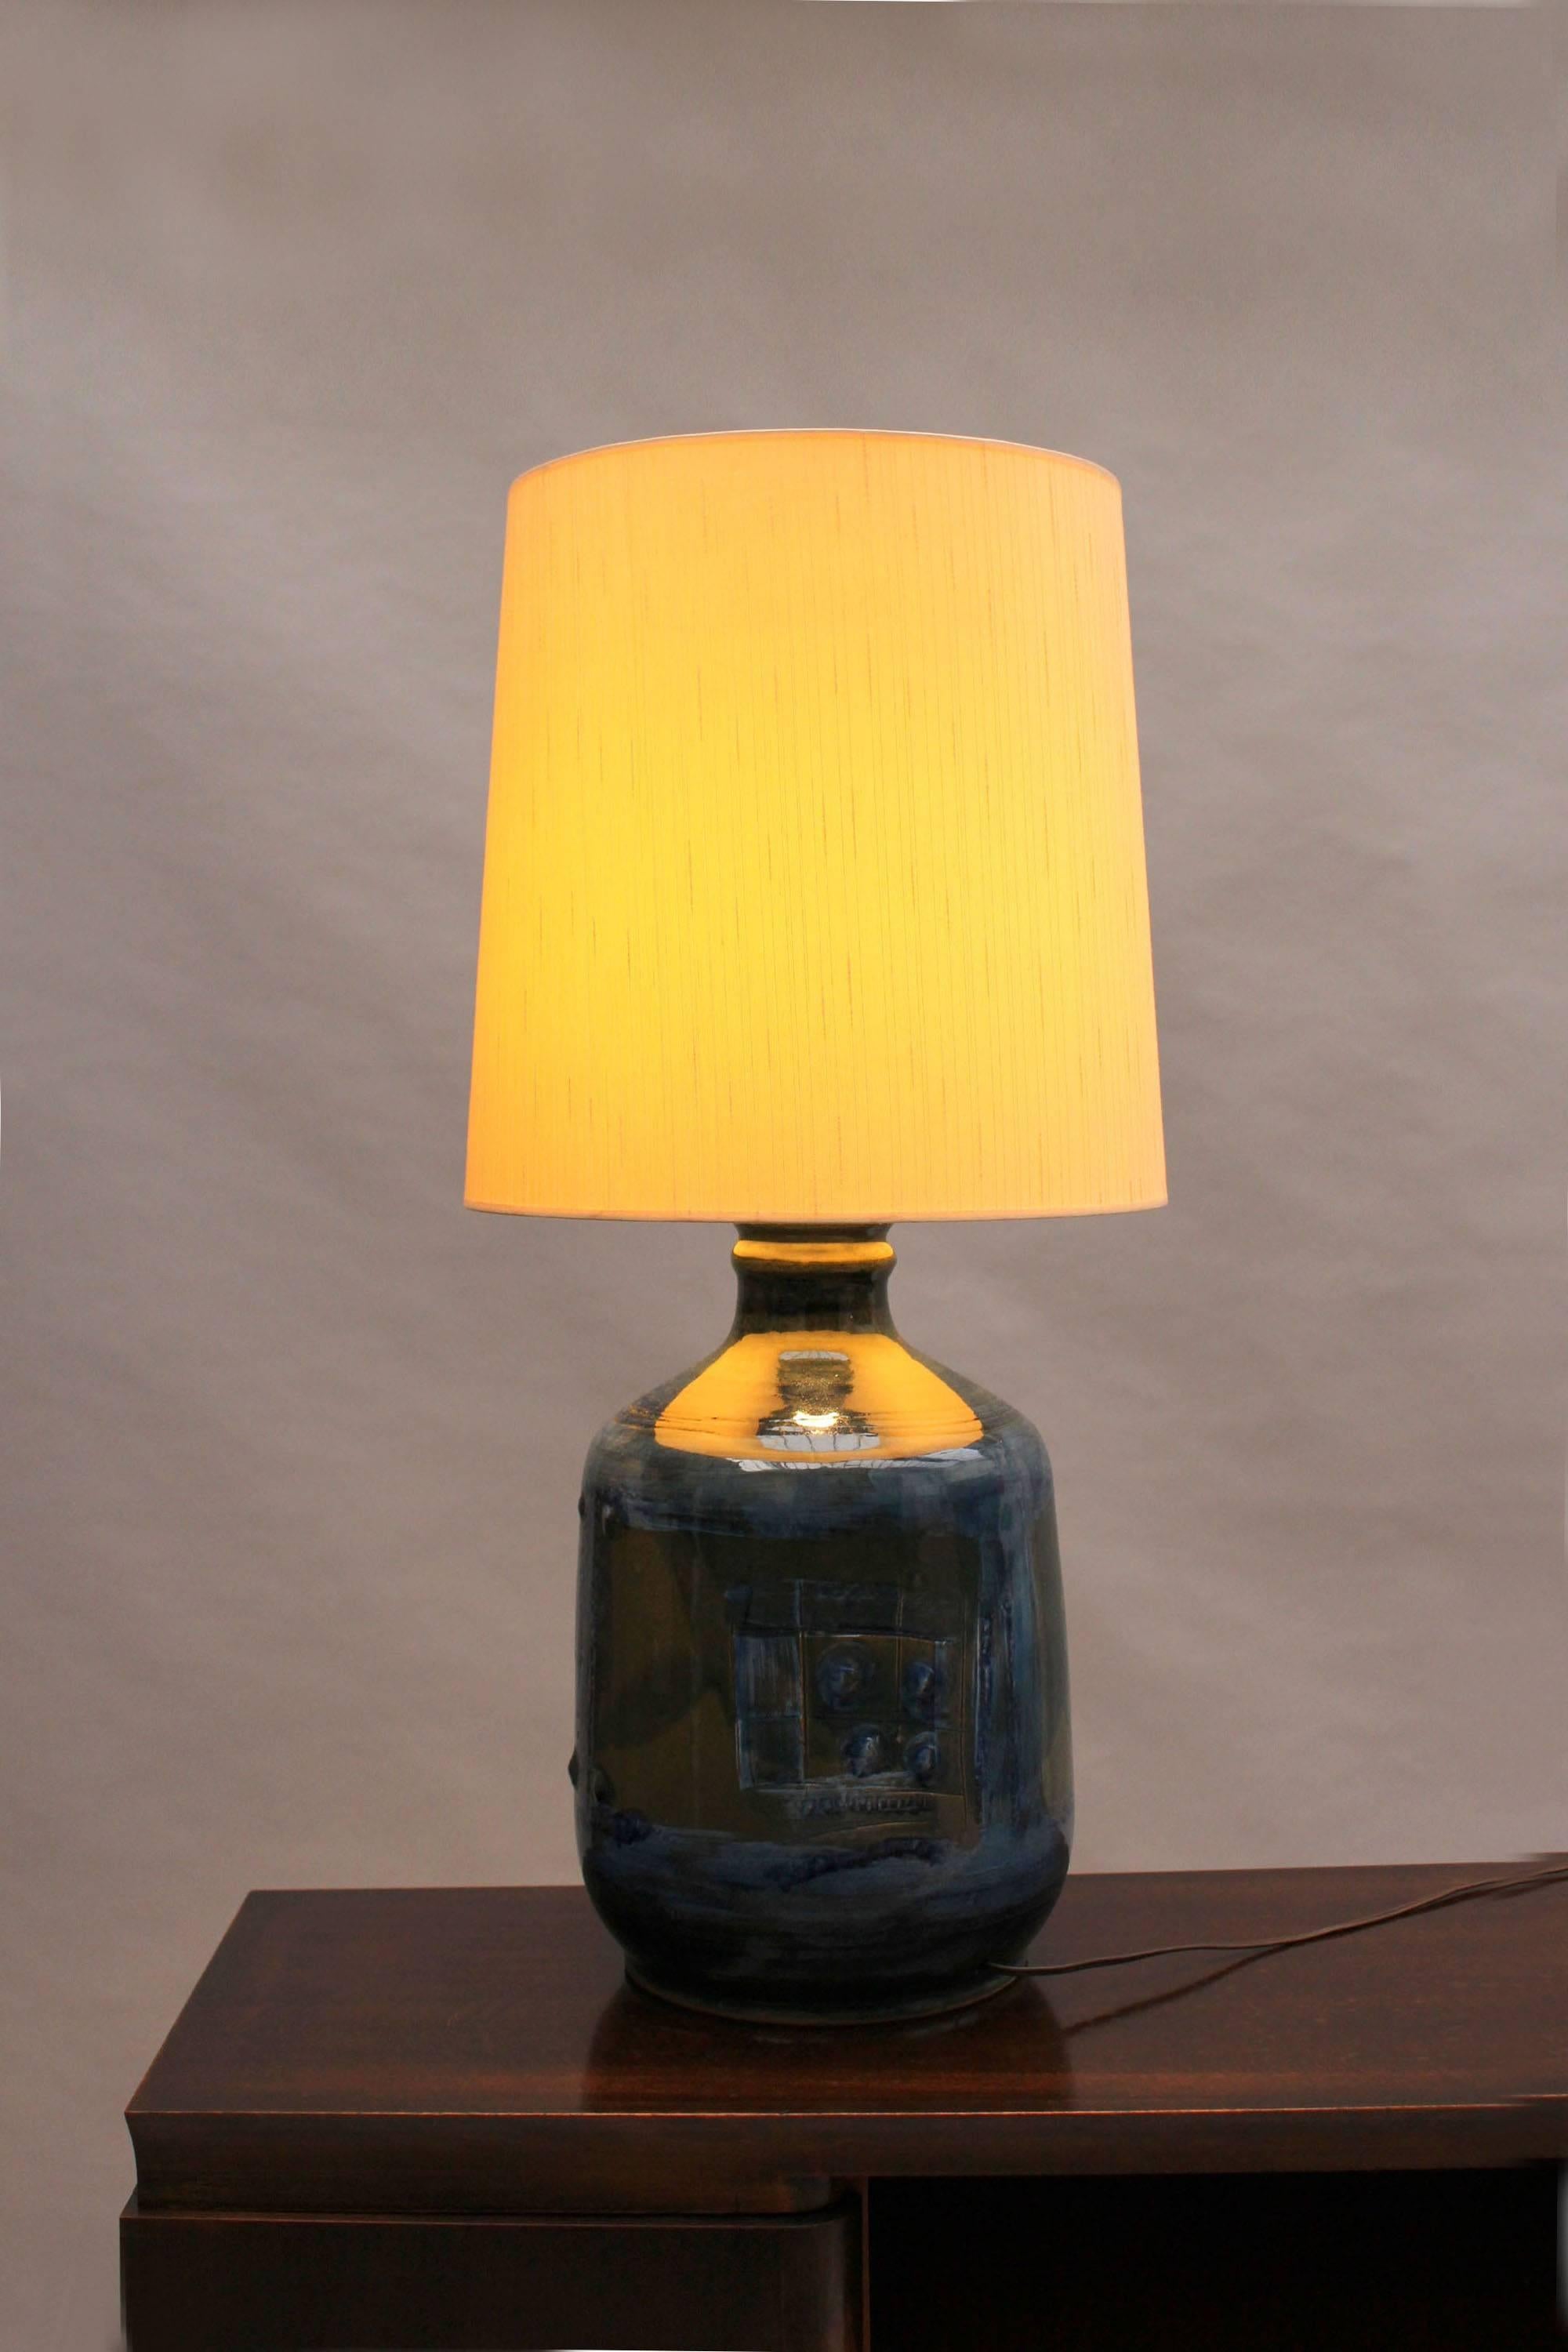 A blue and anthracite 1960's Danish ceramic table lamp by Hanne with its original shade.
Signed.
Dimensions of the ceramic base is H 19.25 in x 11.25 in. Diameter. 